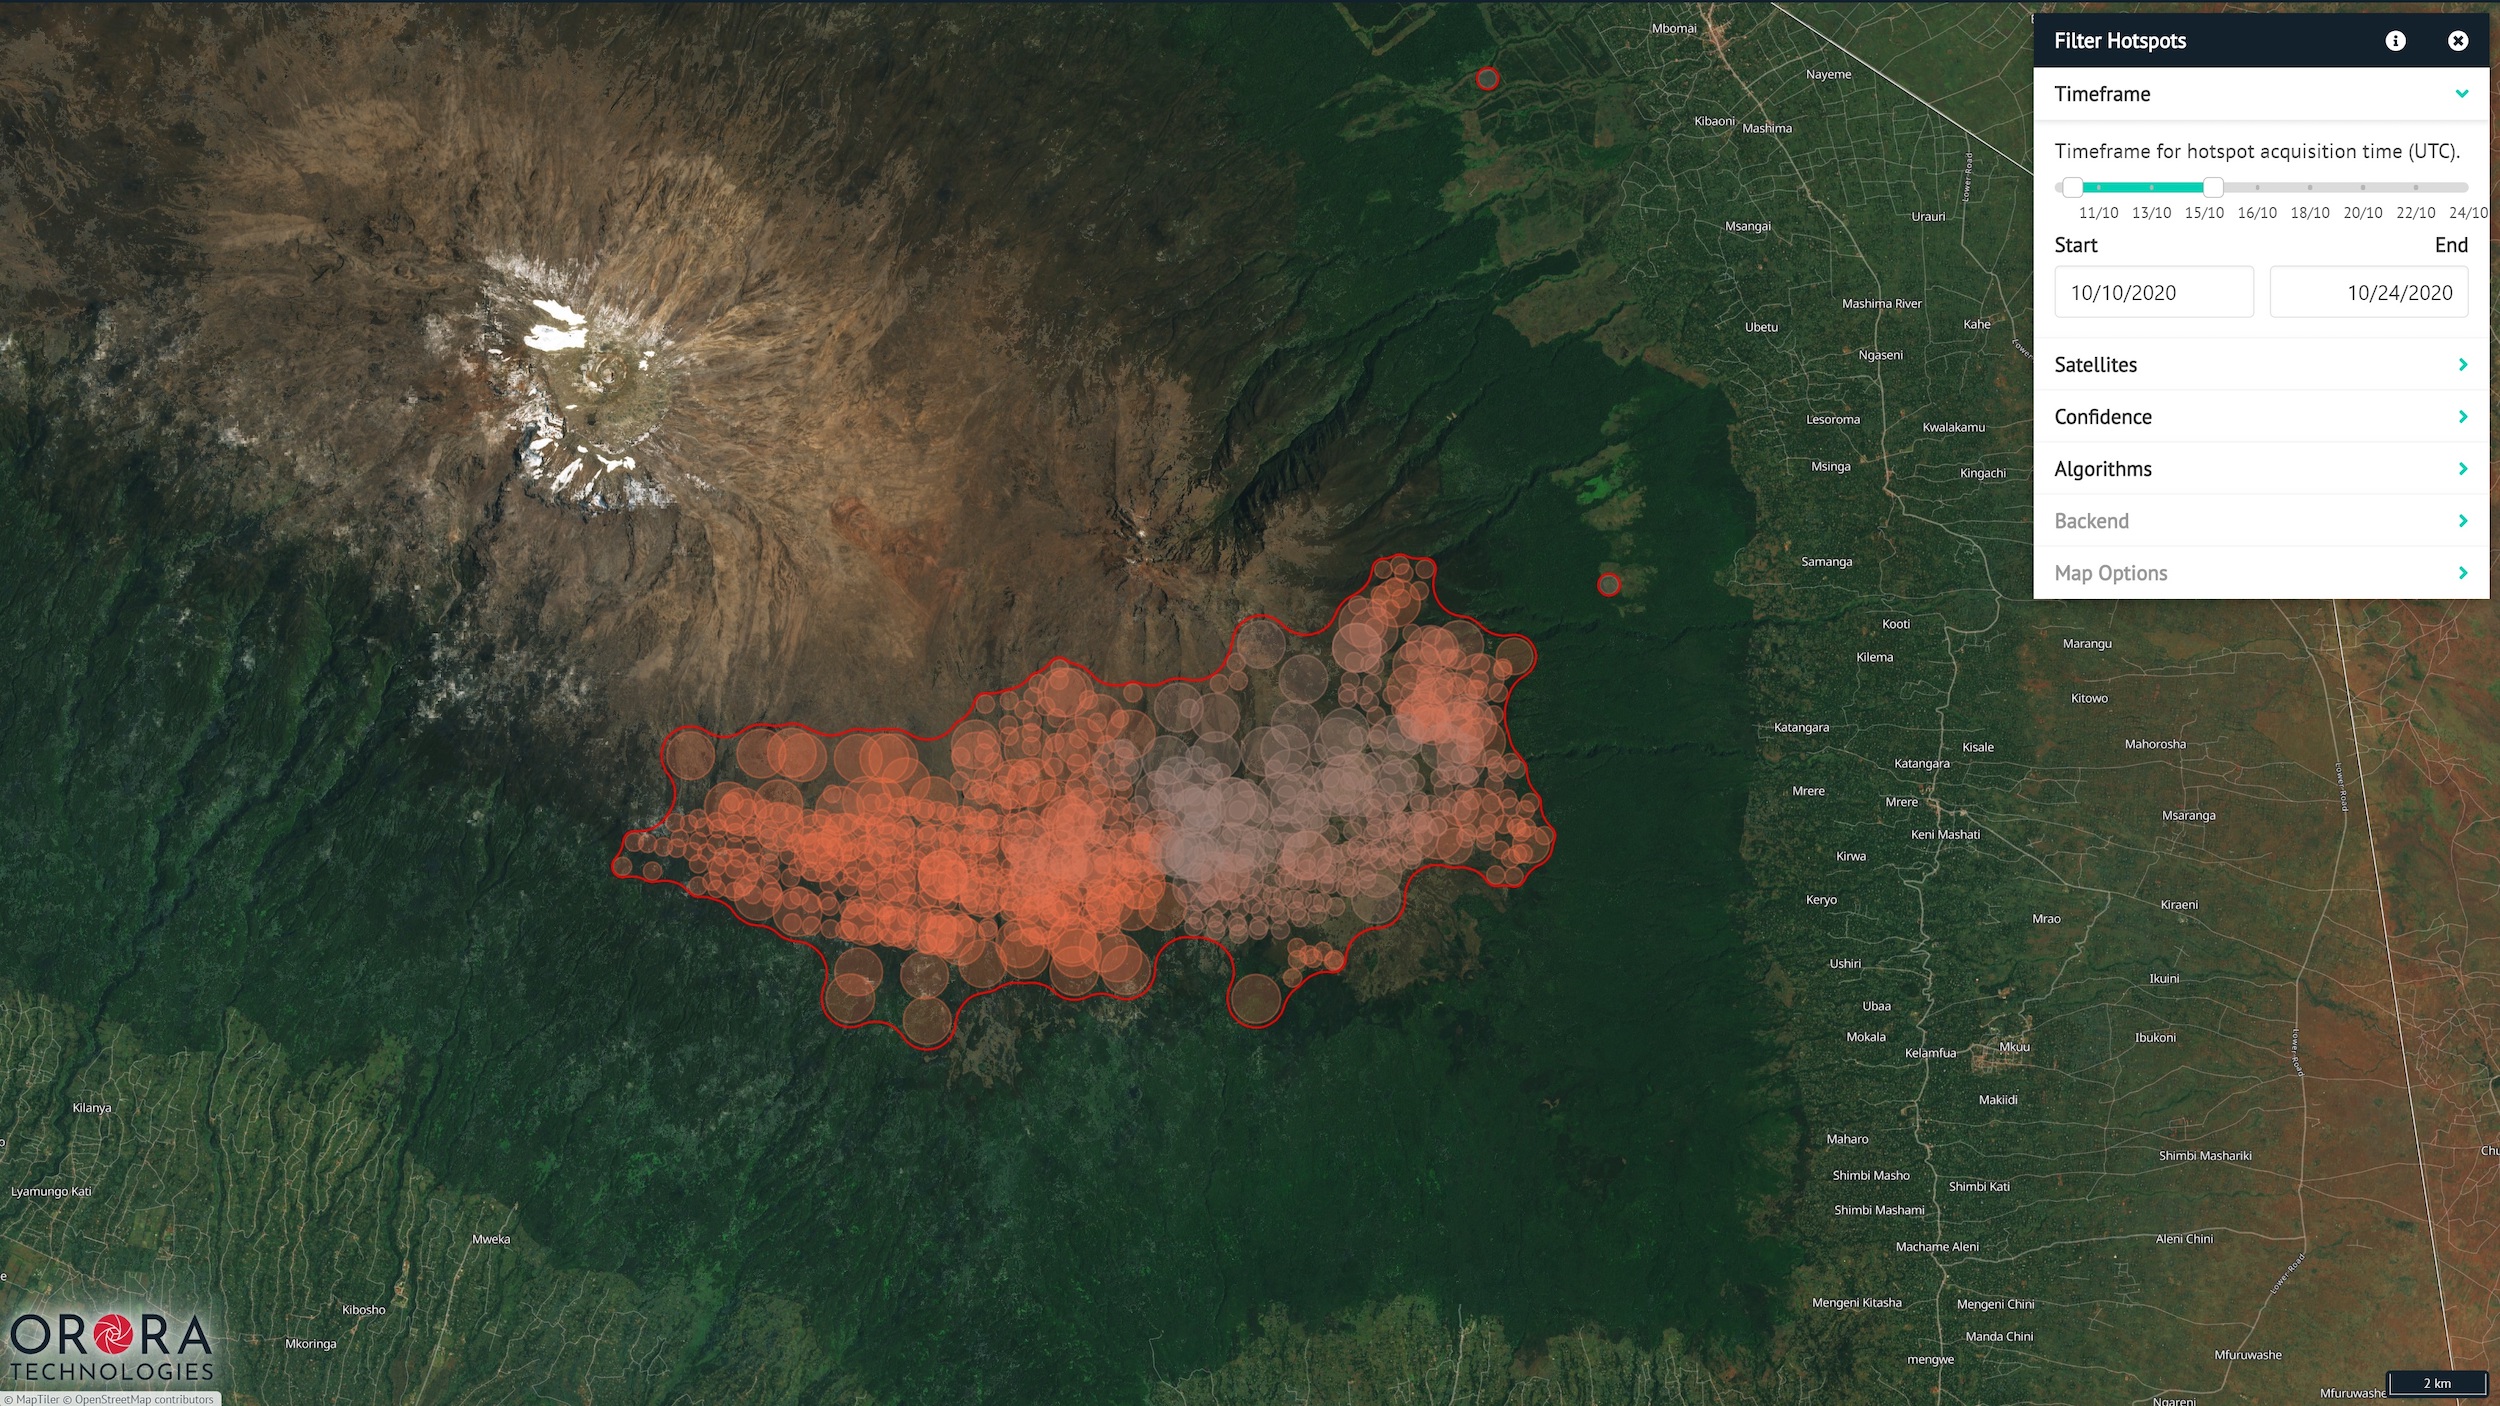 Screenshot of OroraTech wildfire monitoring software showing heat detection in a forest.